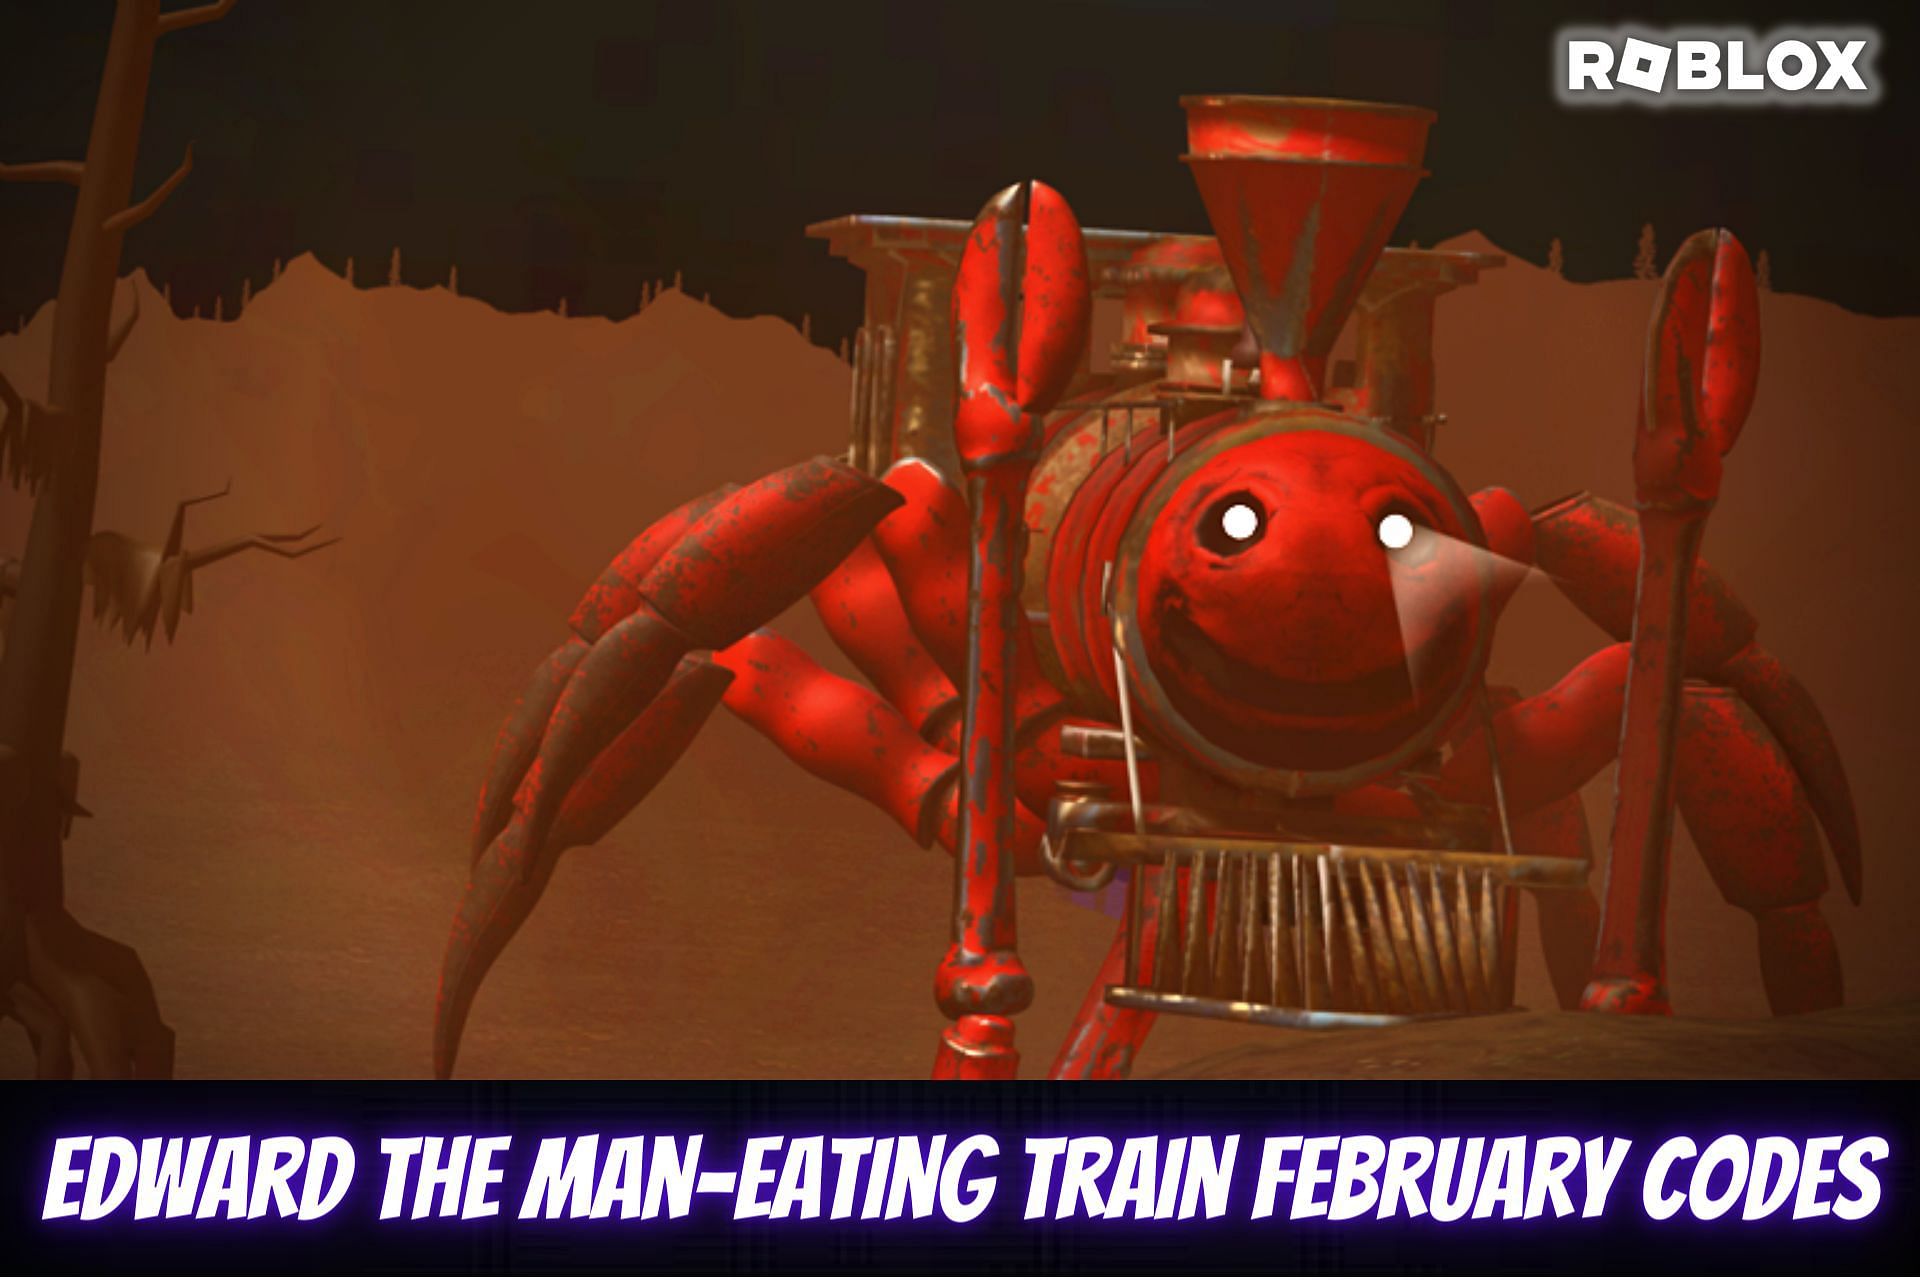 Roblox Edward the ManEating Train codes (February 2023)